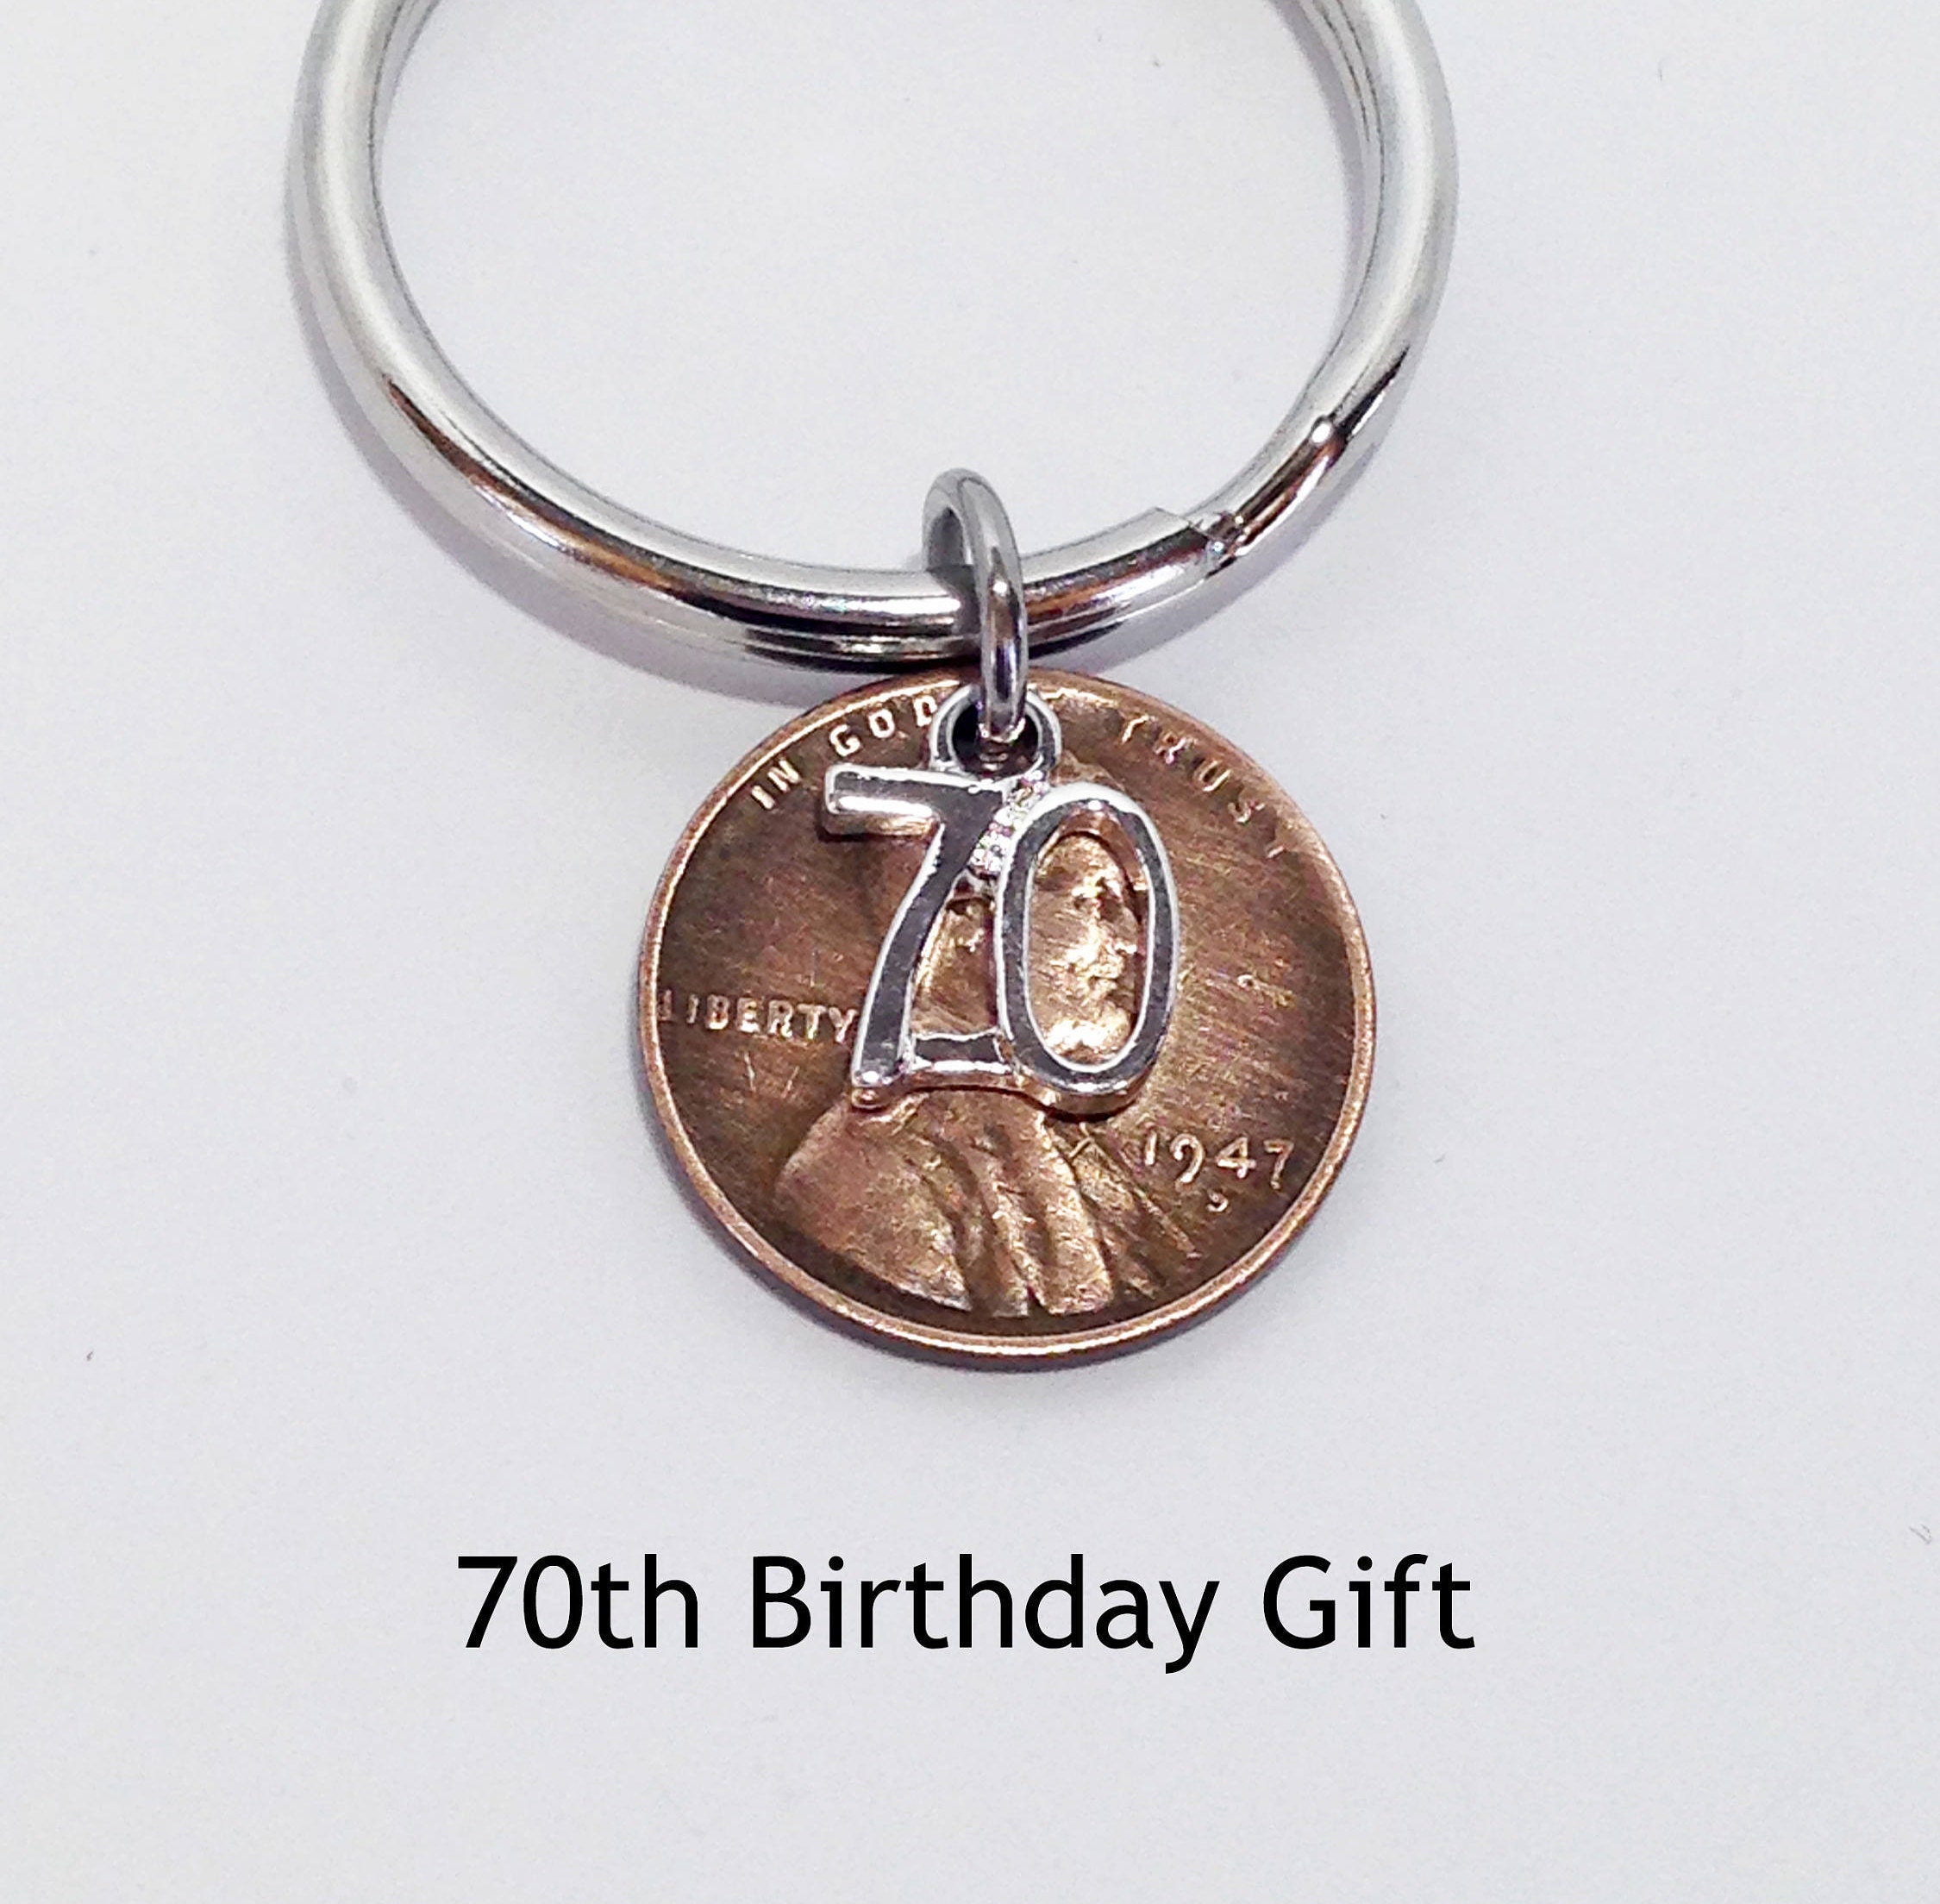 70Th Birthday Gifts - The Best 70th Birthday Gift Ideas for Her | Passing Down ... : A beautiful and amazing 70th birthday gift male refers to a digital photo frame.